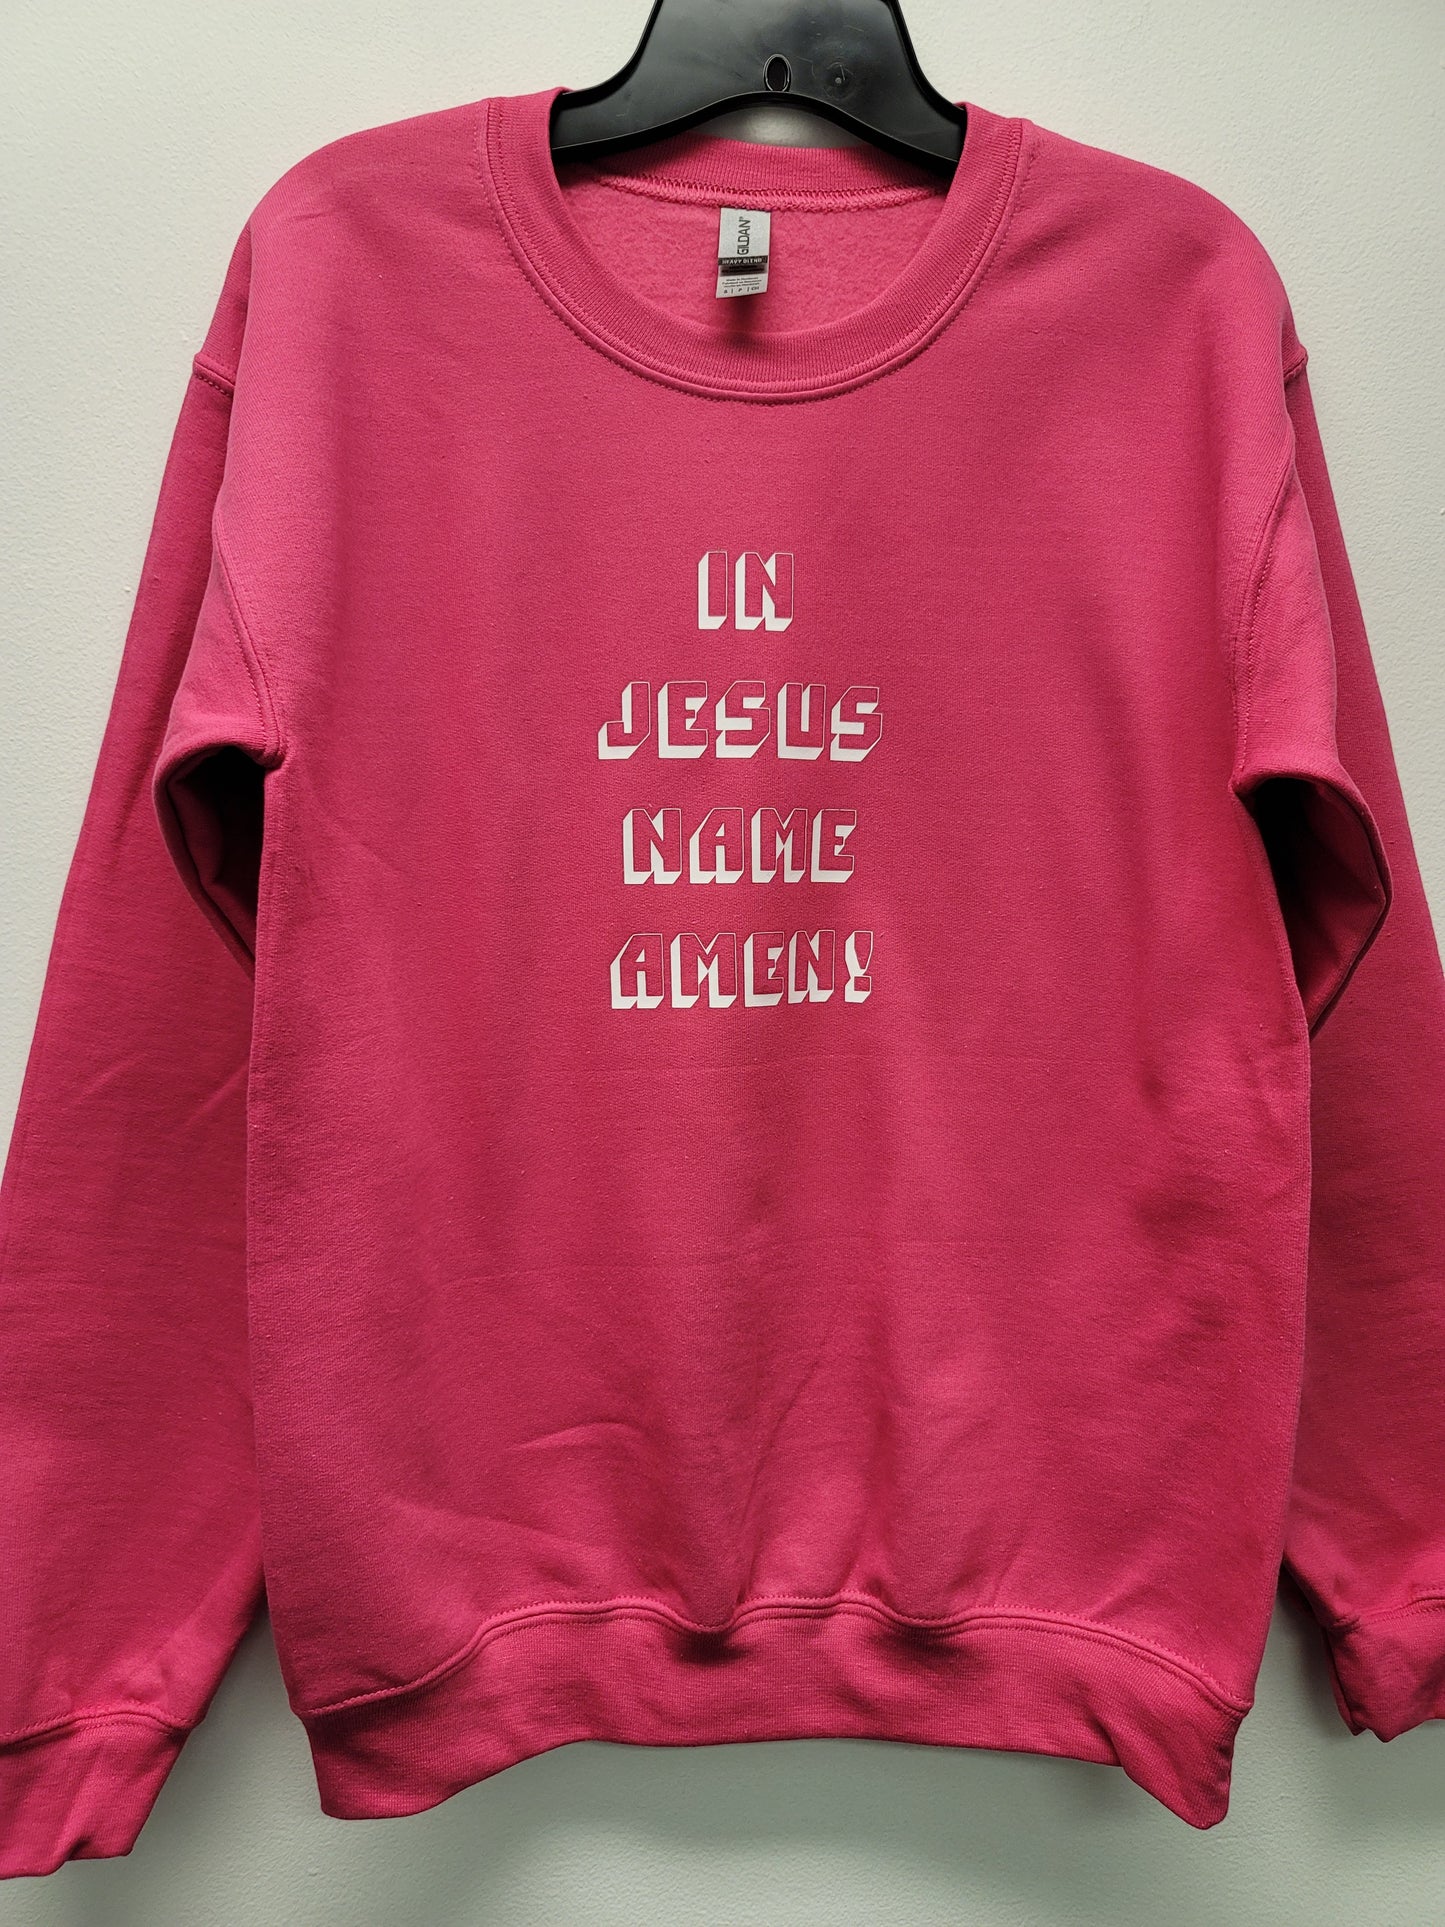 In Jesus Name Pink long sleeve crew neck sweater by JulissaDesigns